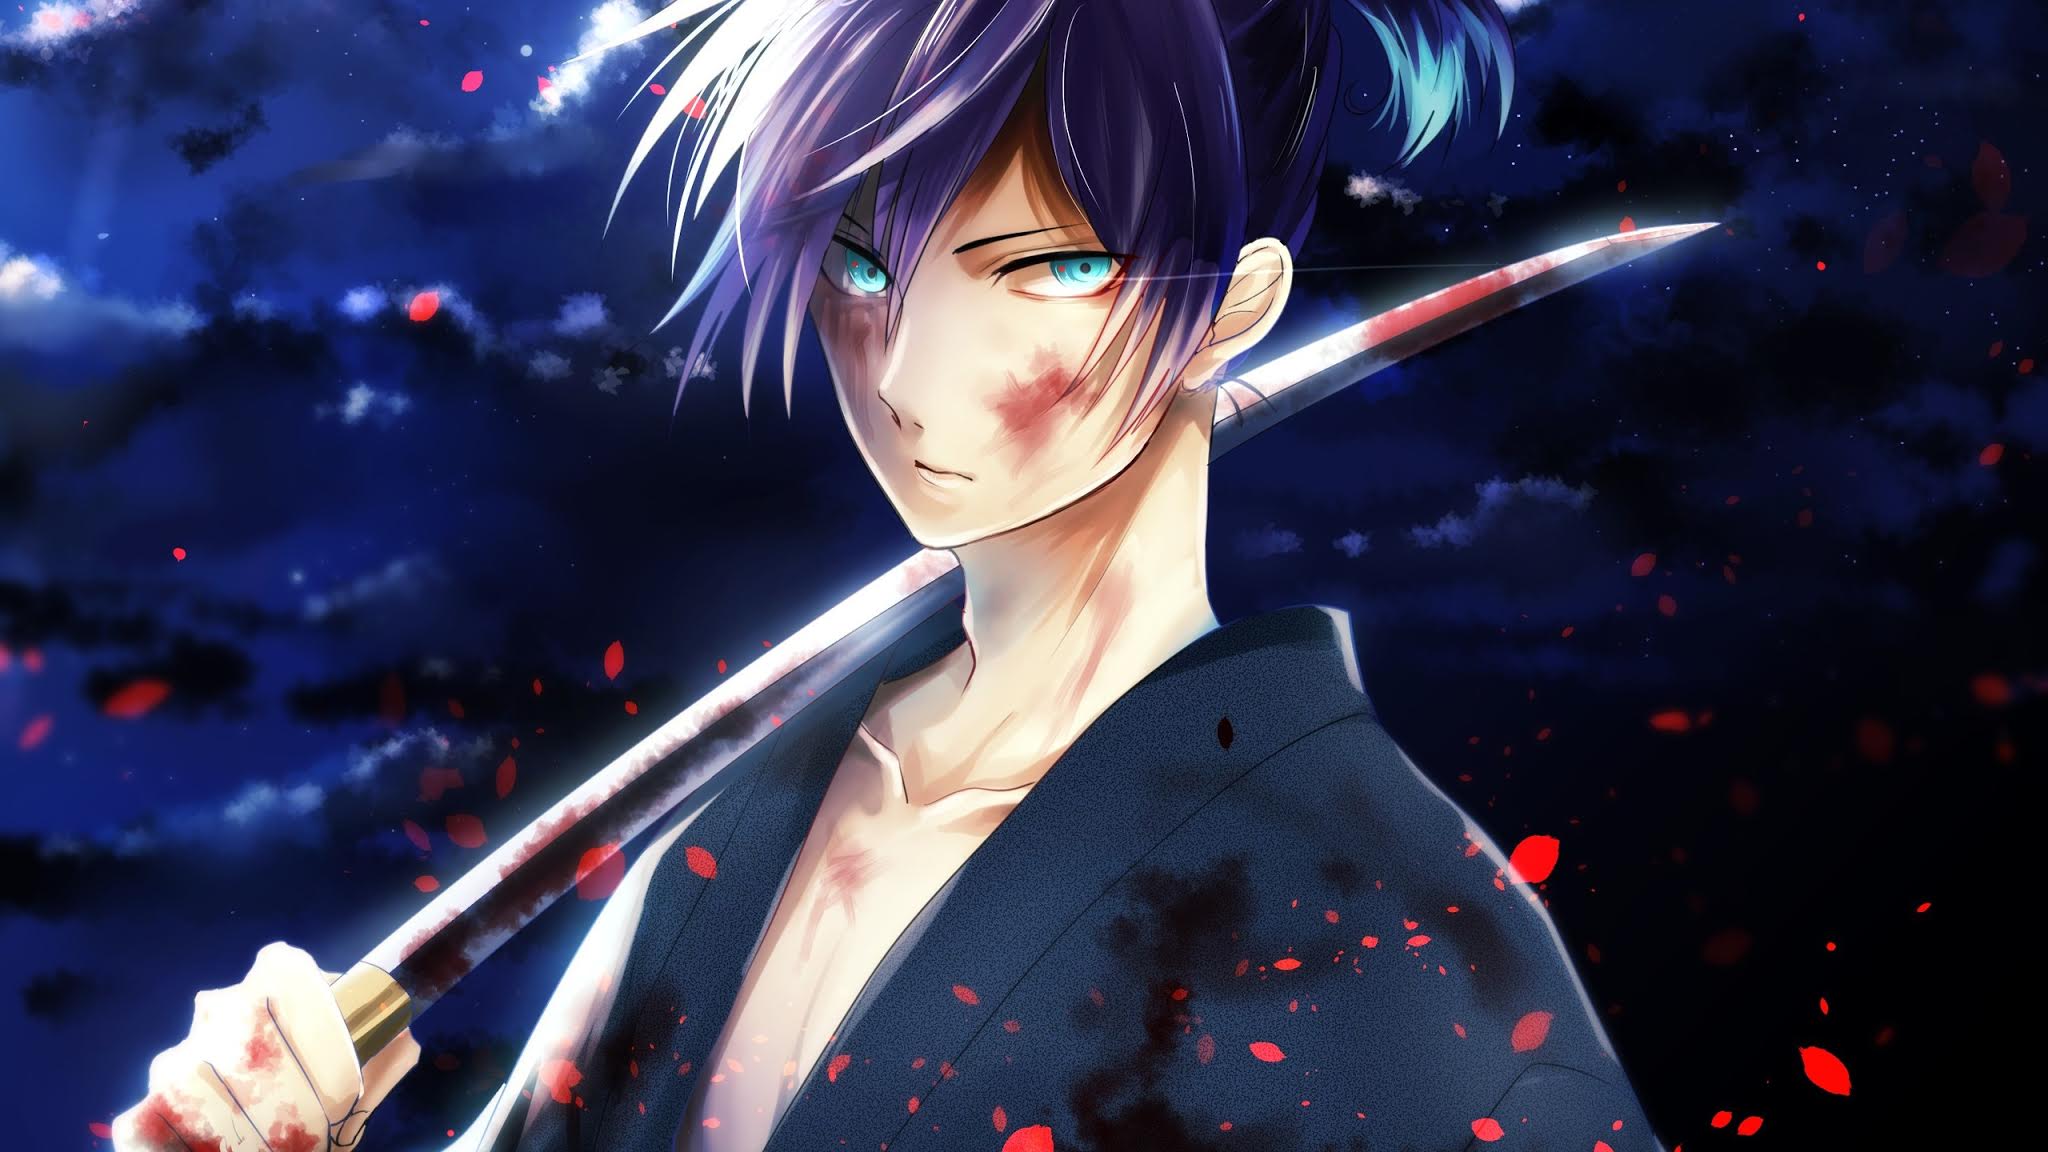 2. Yato from Noragami - wide 10